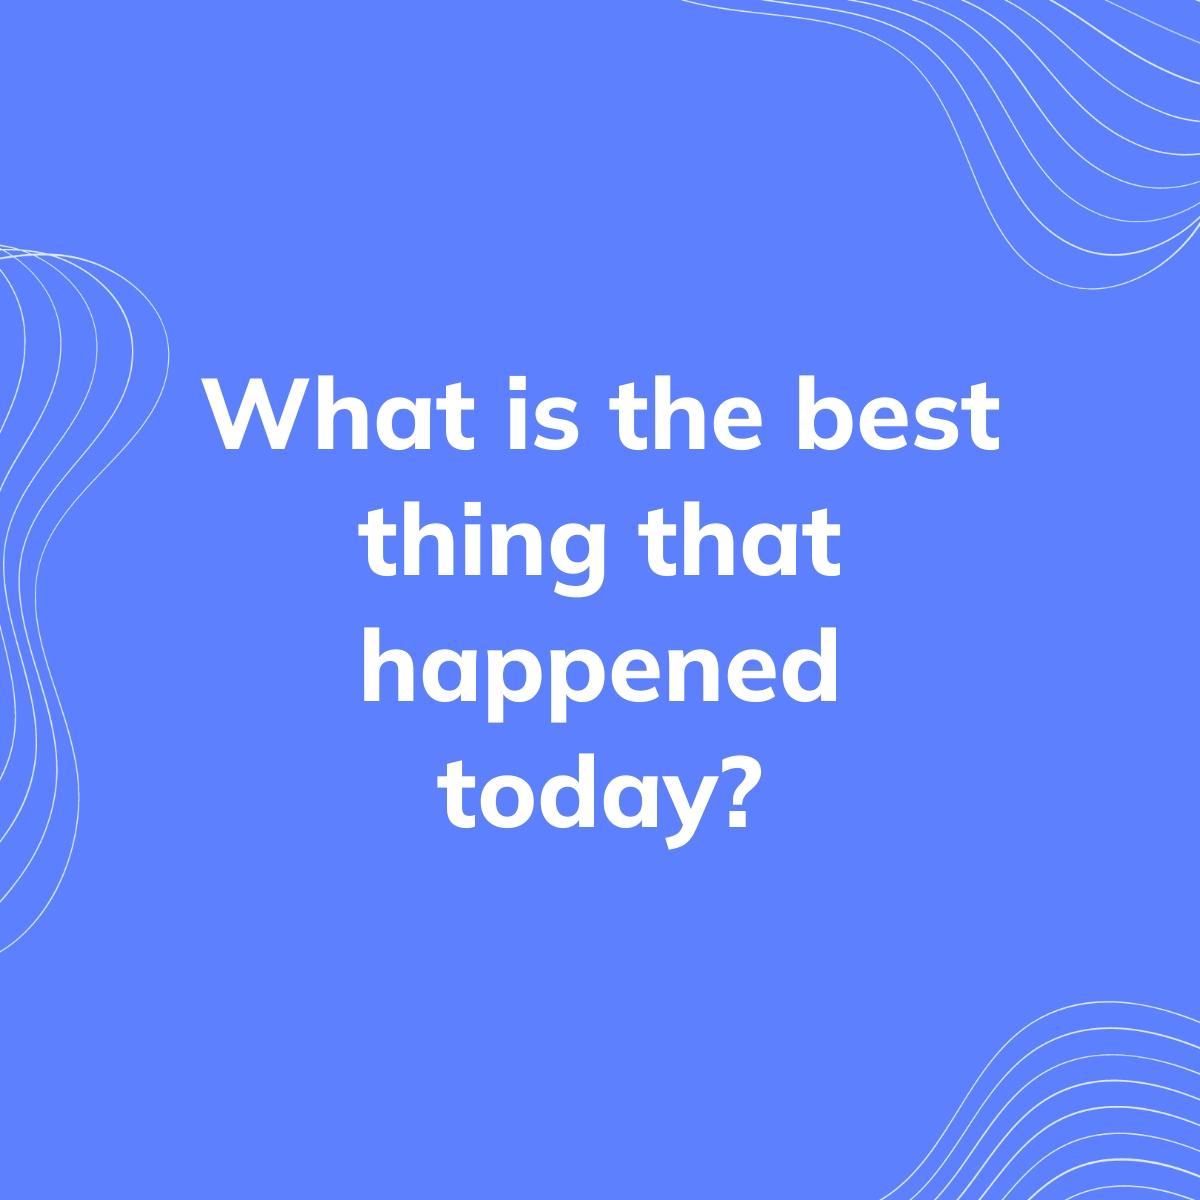 Journal Prompt: What is the best thing that happened today?